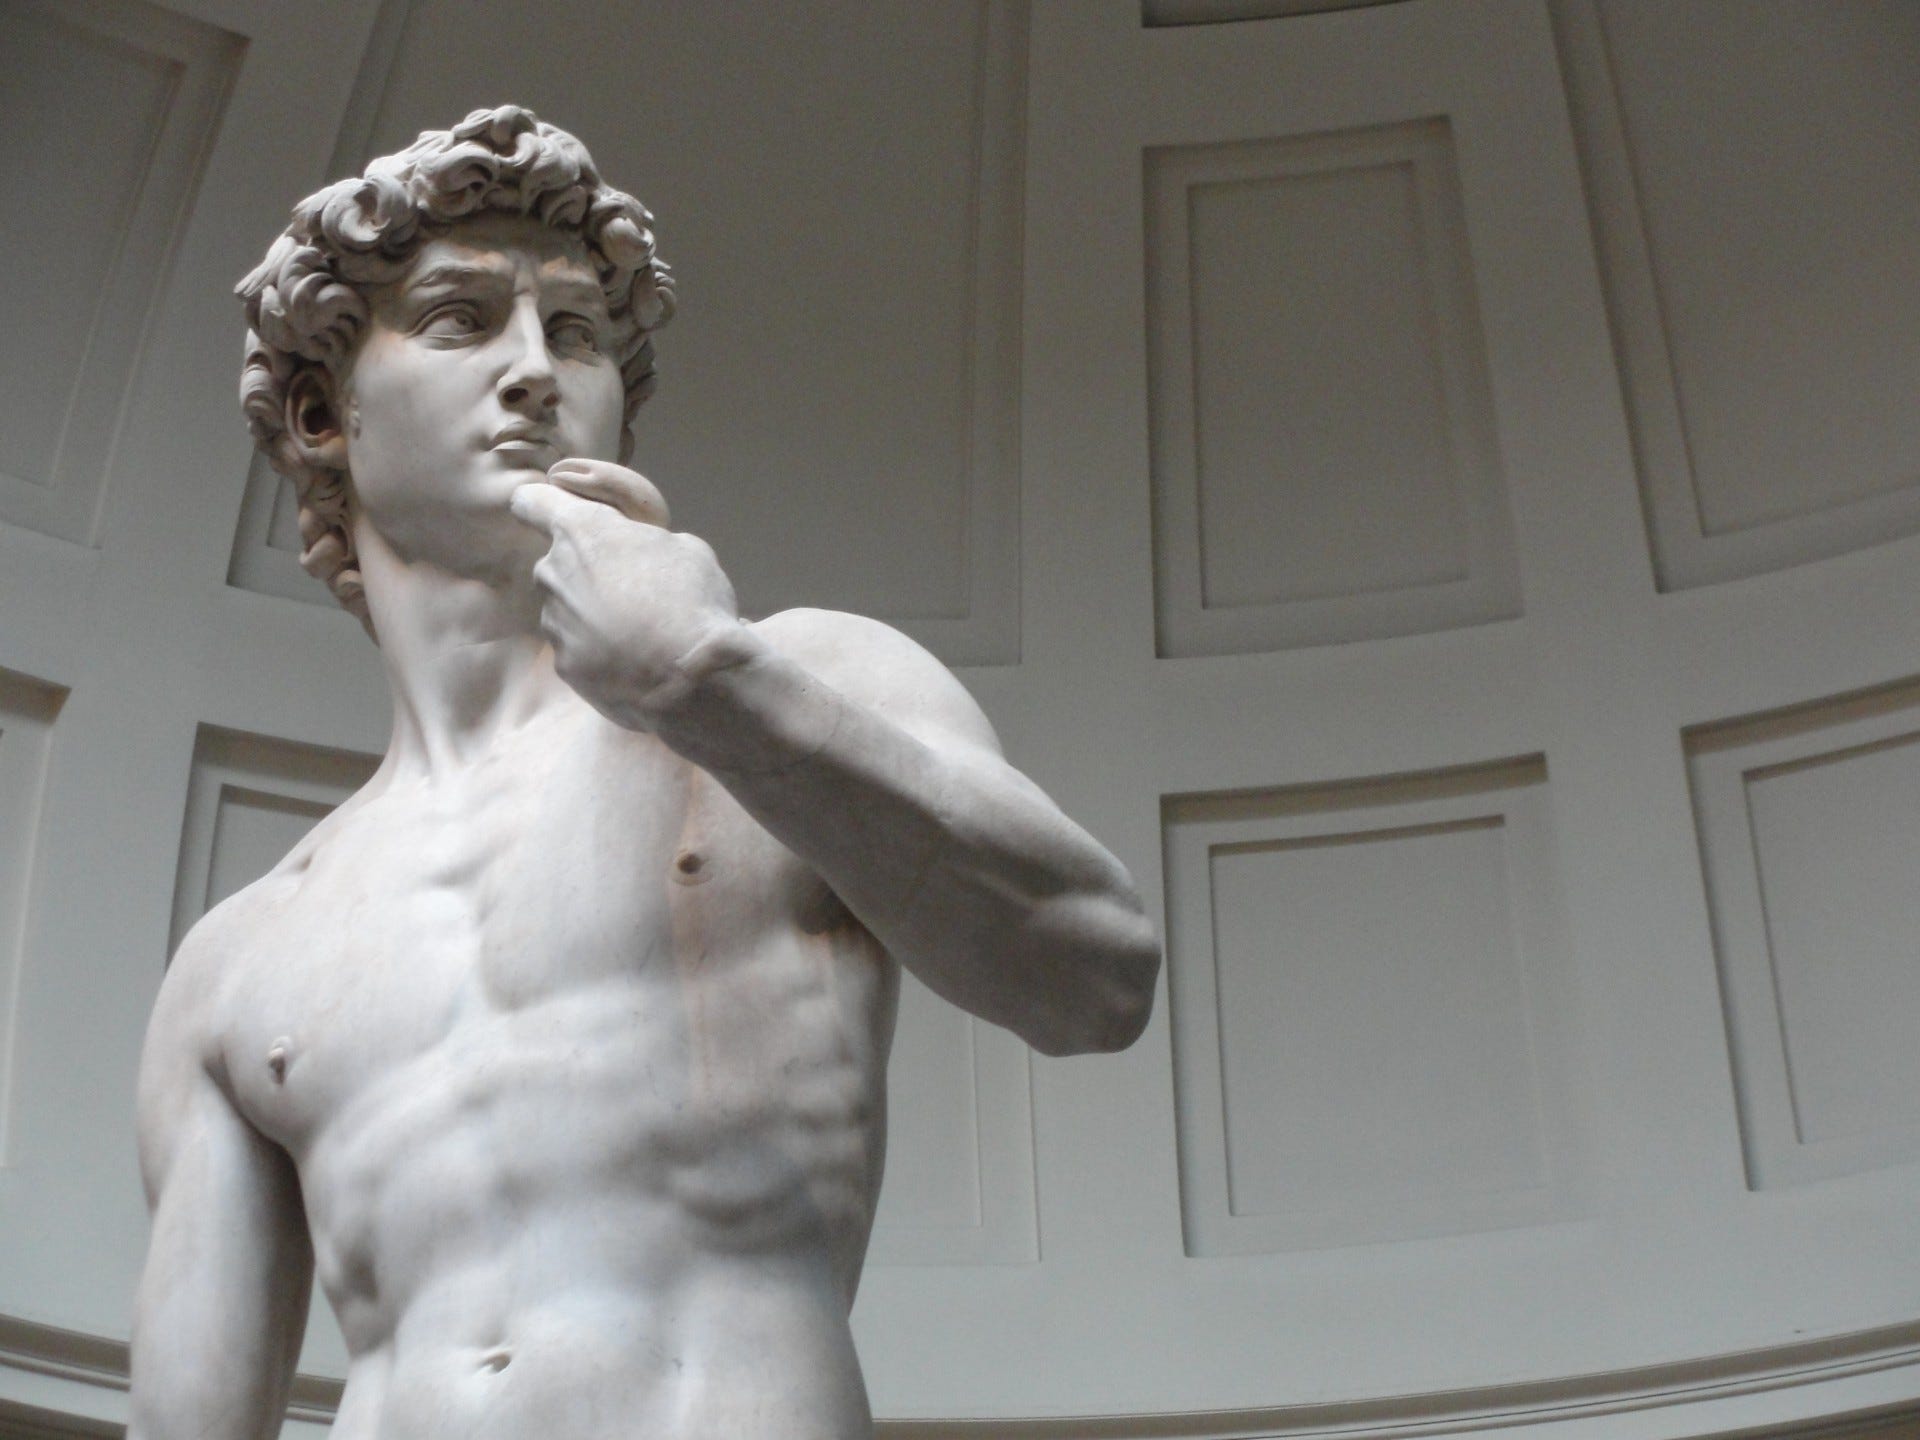 Today in History, September 8, 1504: Michelangelo's David statue unveiled